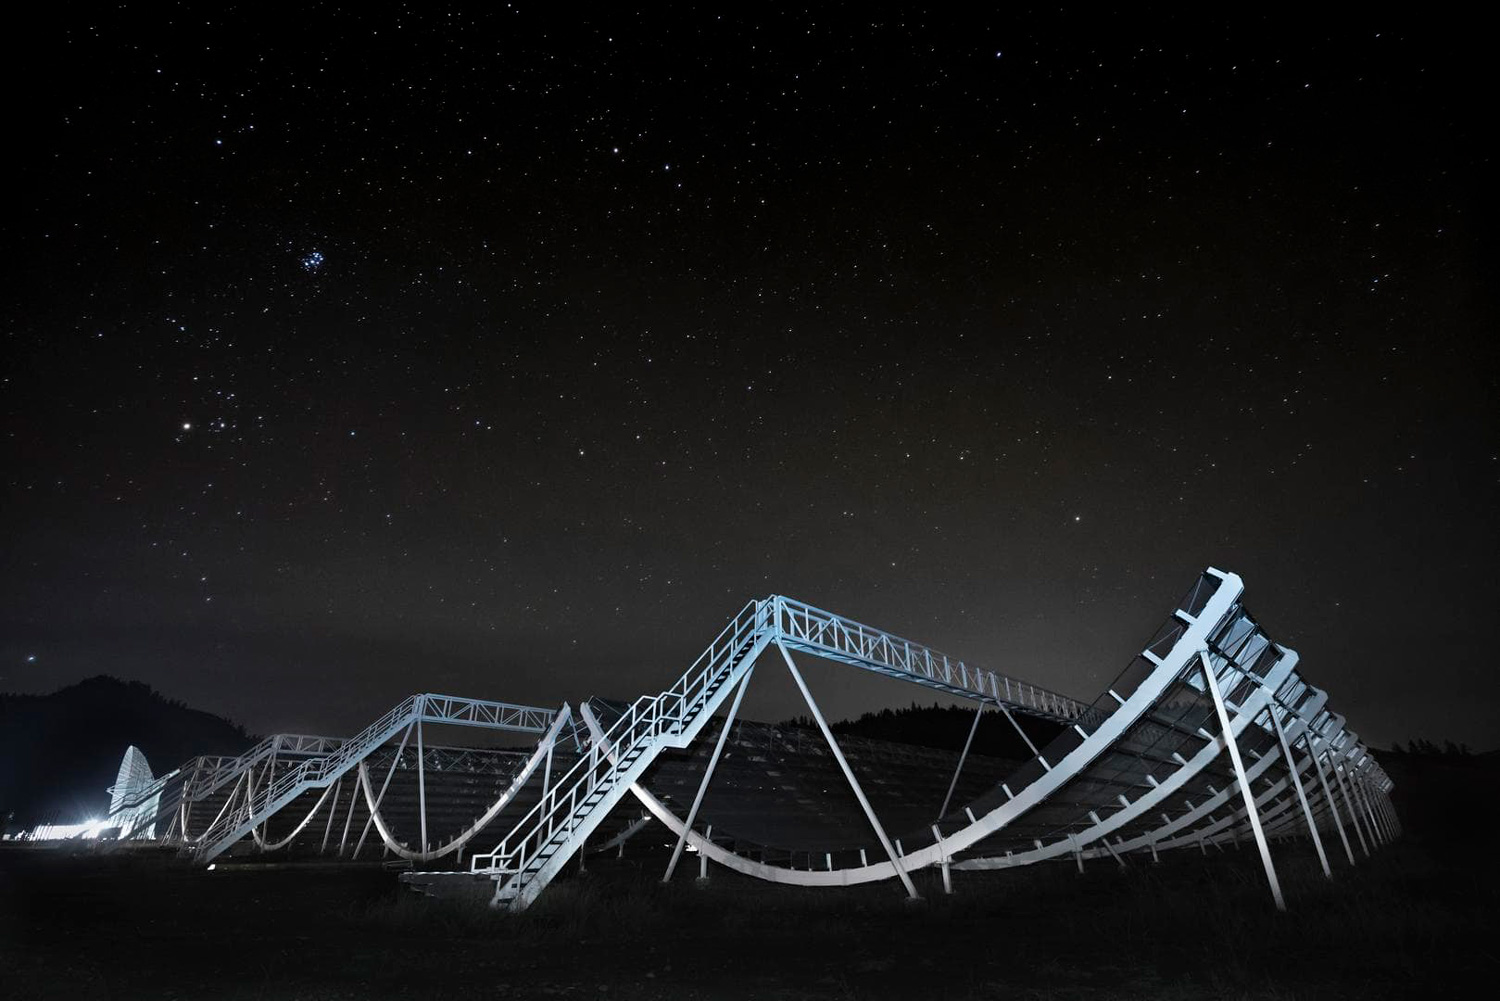 CHIME telescope detects more than 500 mysterious fast radio bursts in its  first year of operation | MIT News | Massachusetts Institute of Technology